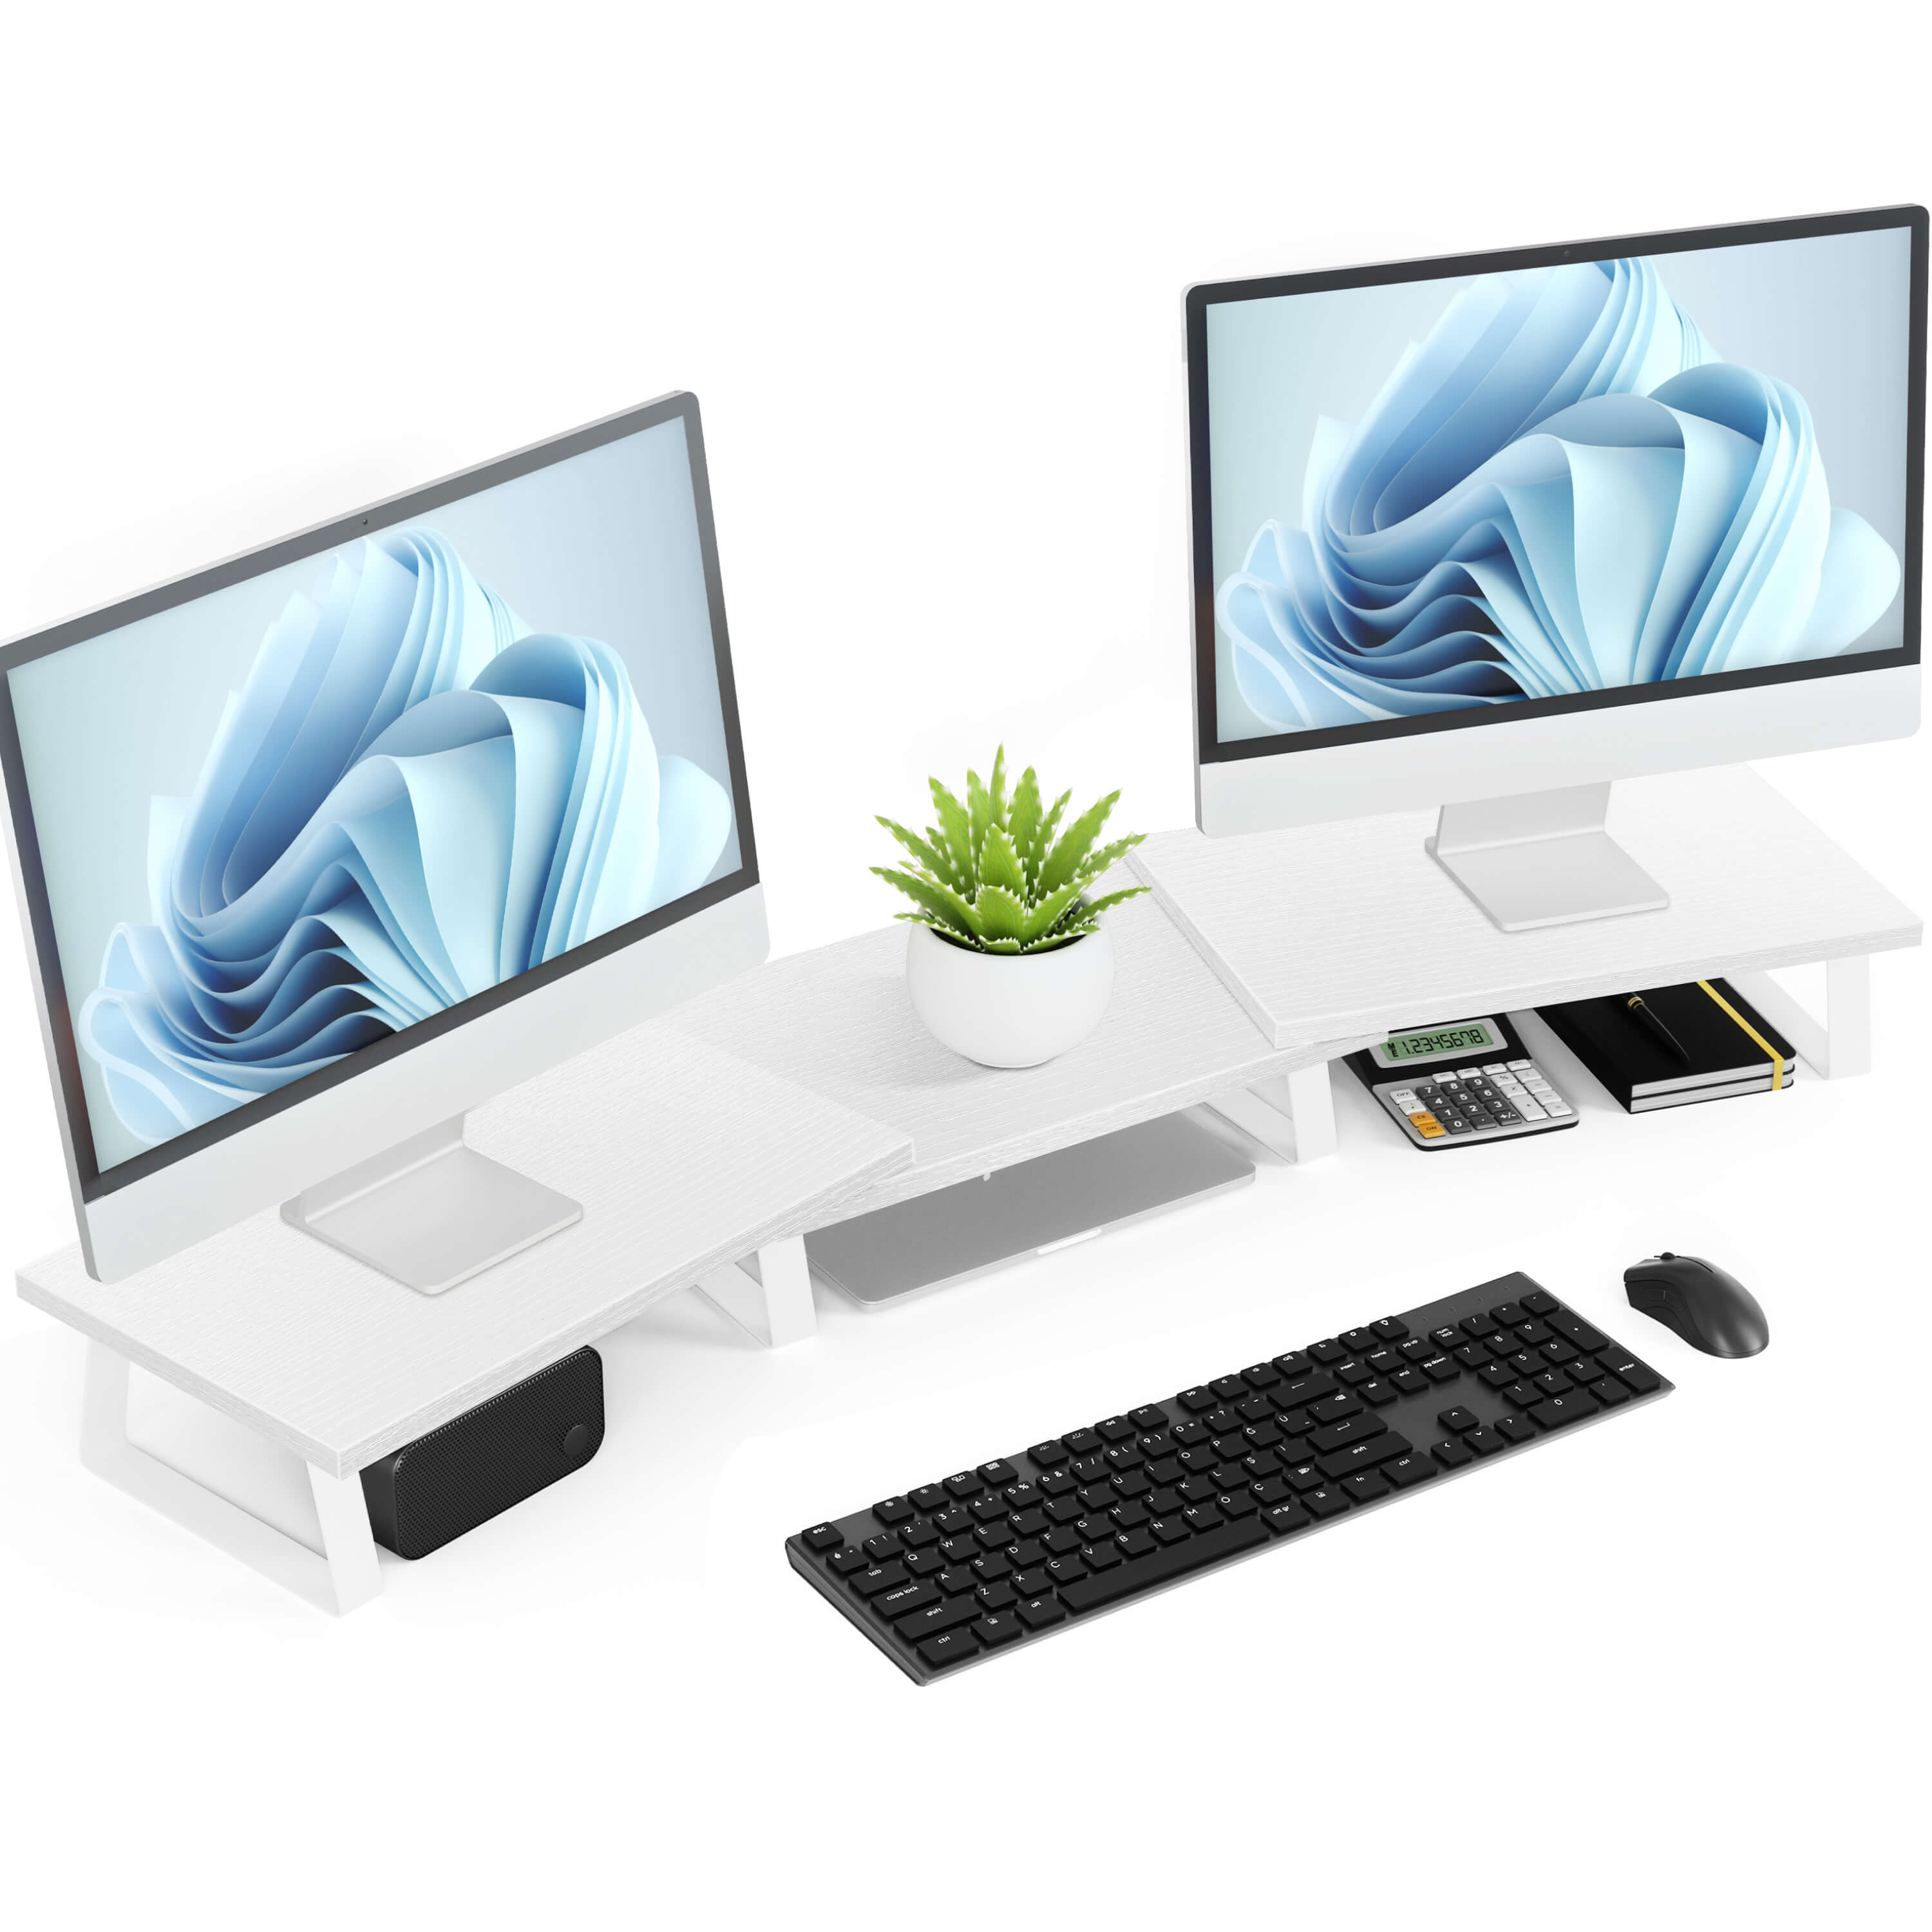 Aothia  Eco-friendly Desk Accessories for Your Workspace